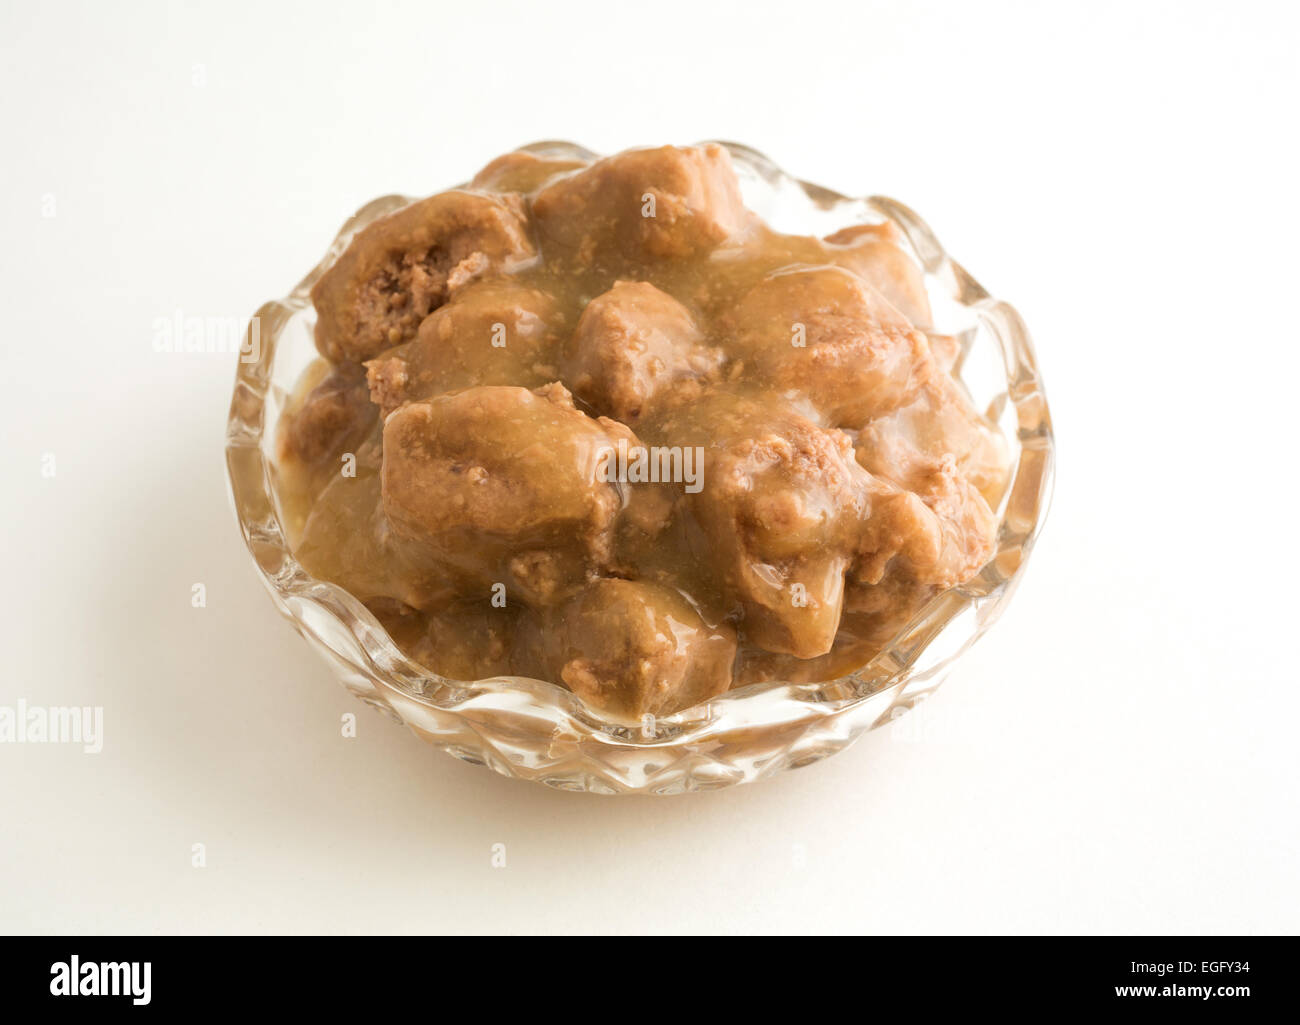 Chicken dog food in a small decorative bowl atop a white floor with natural light. Stock Photo